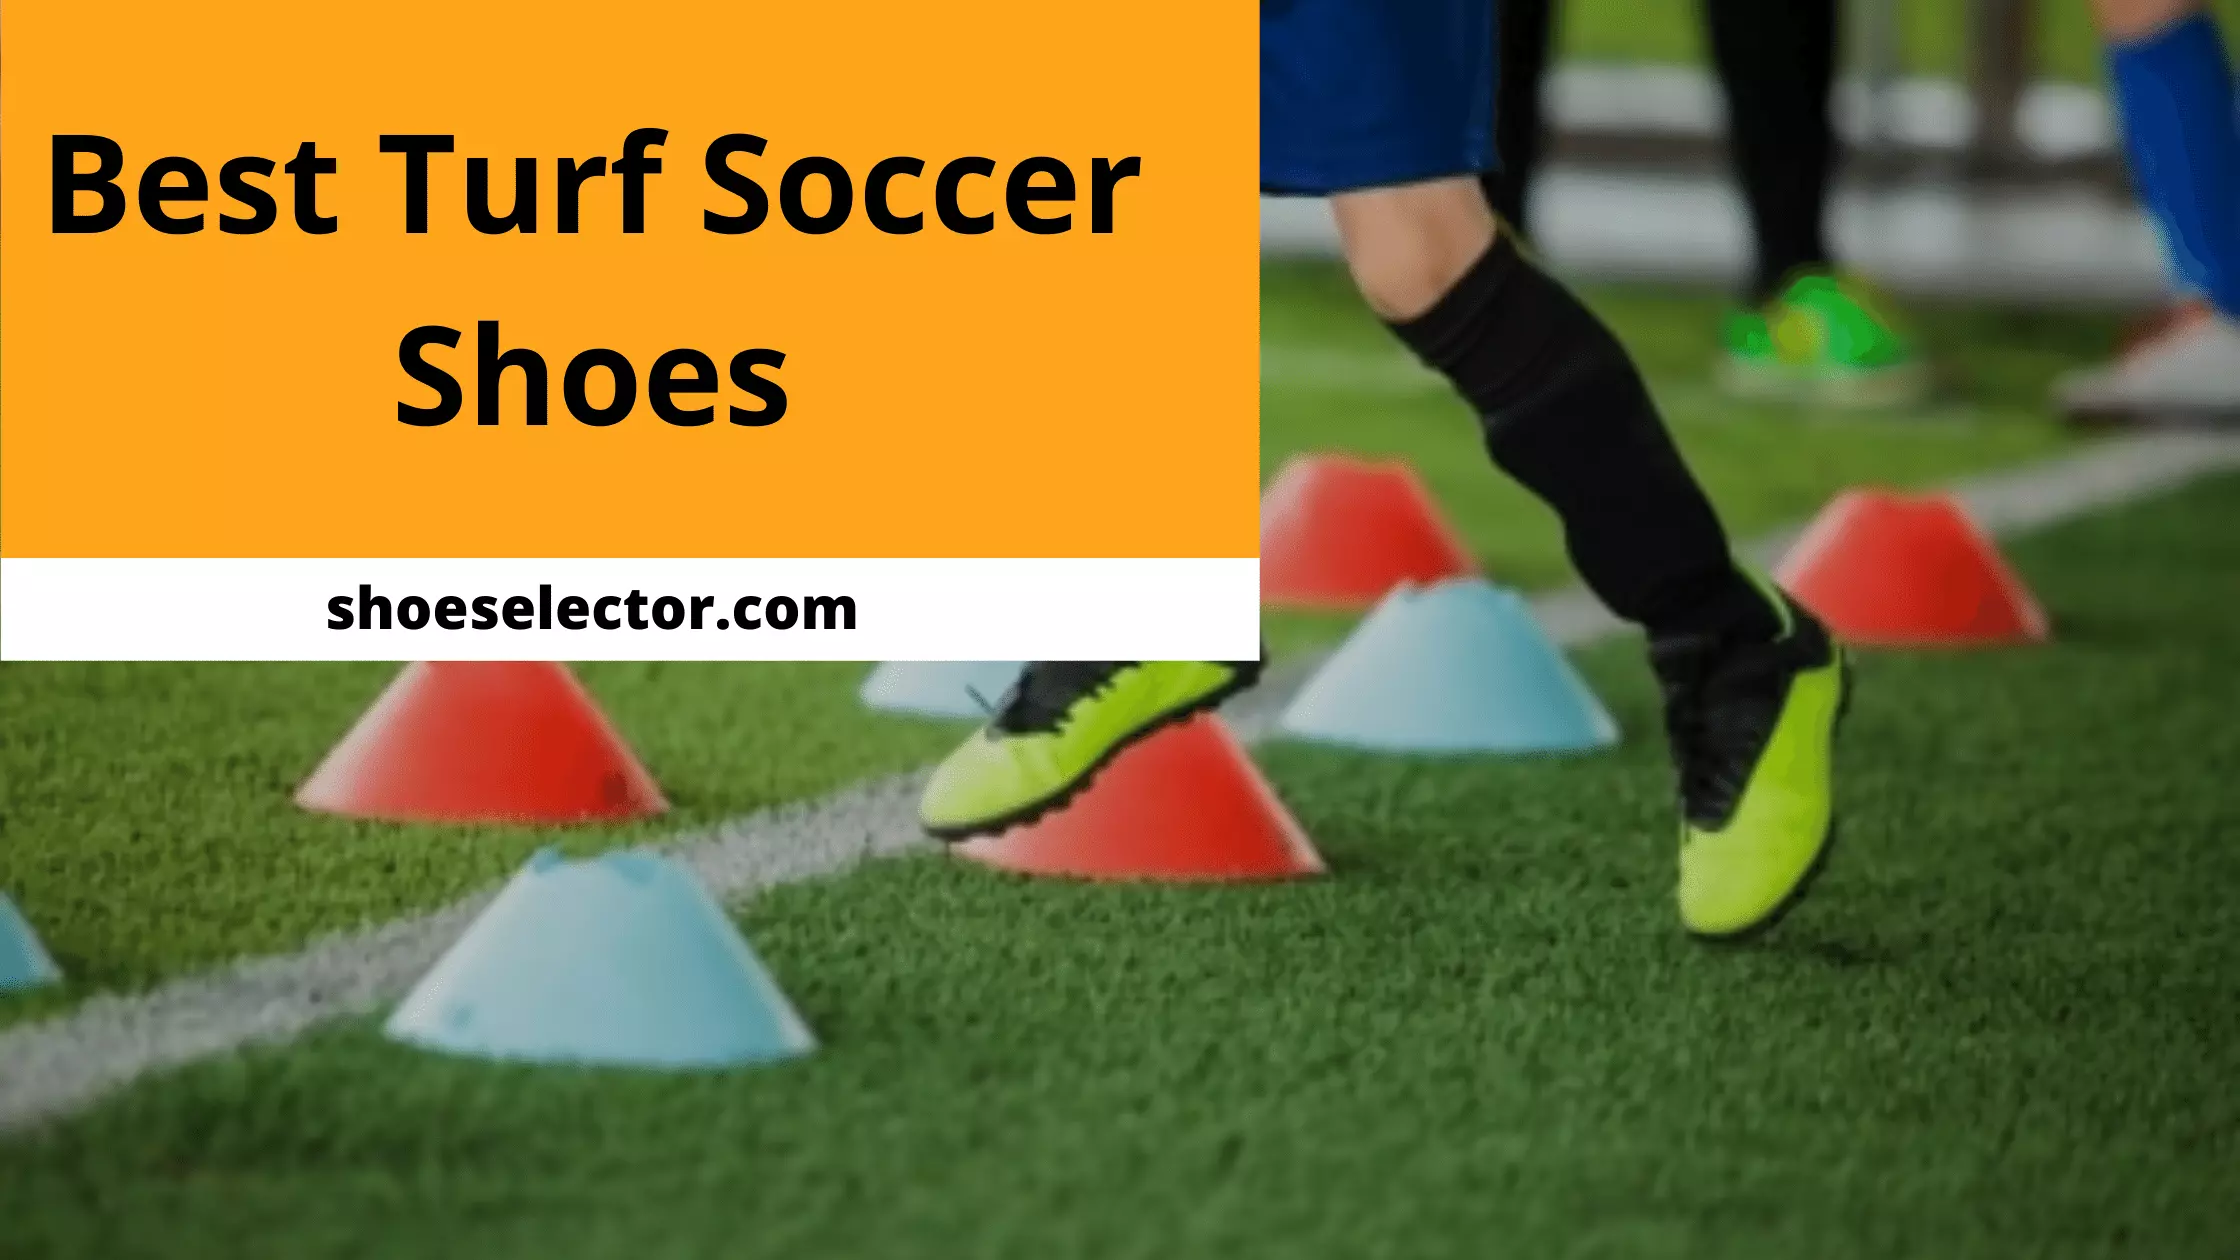 Best Turf Soccer Shoes - Latest Guide